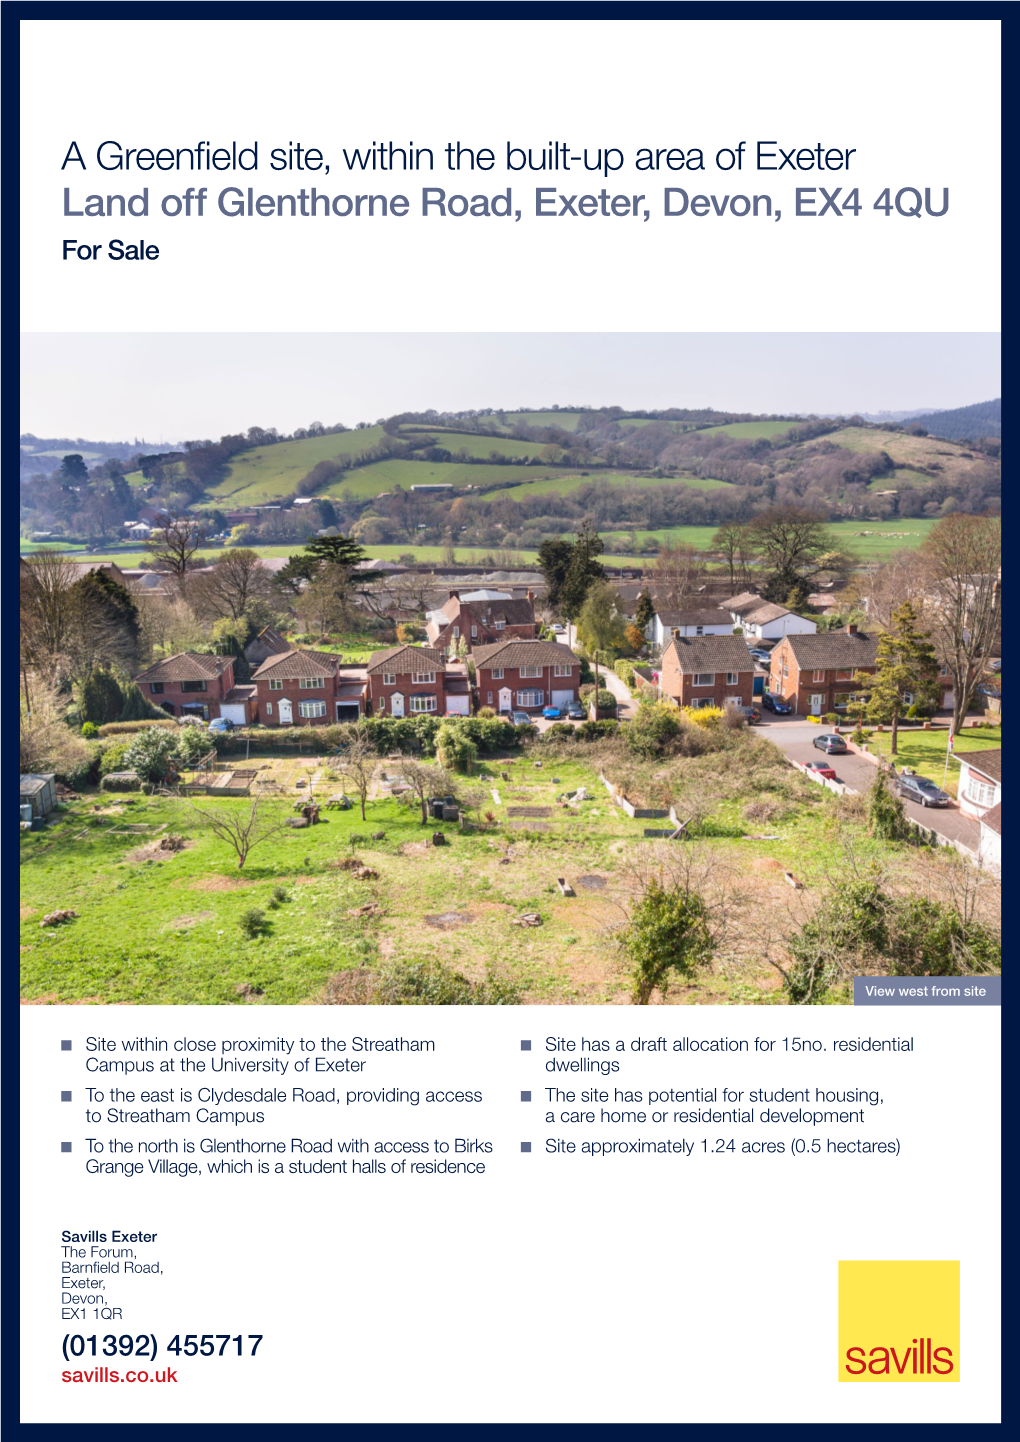 A Greenfield Site, Within the Built-Up Area of Exeter Land Off Glenthorne Road, Exeter, Devon, EX4 4QU for Sale